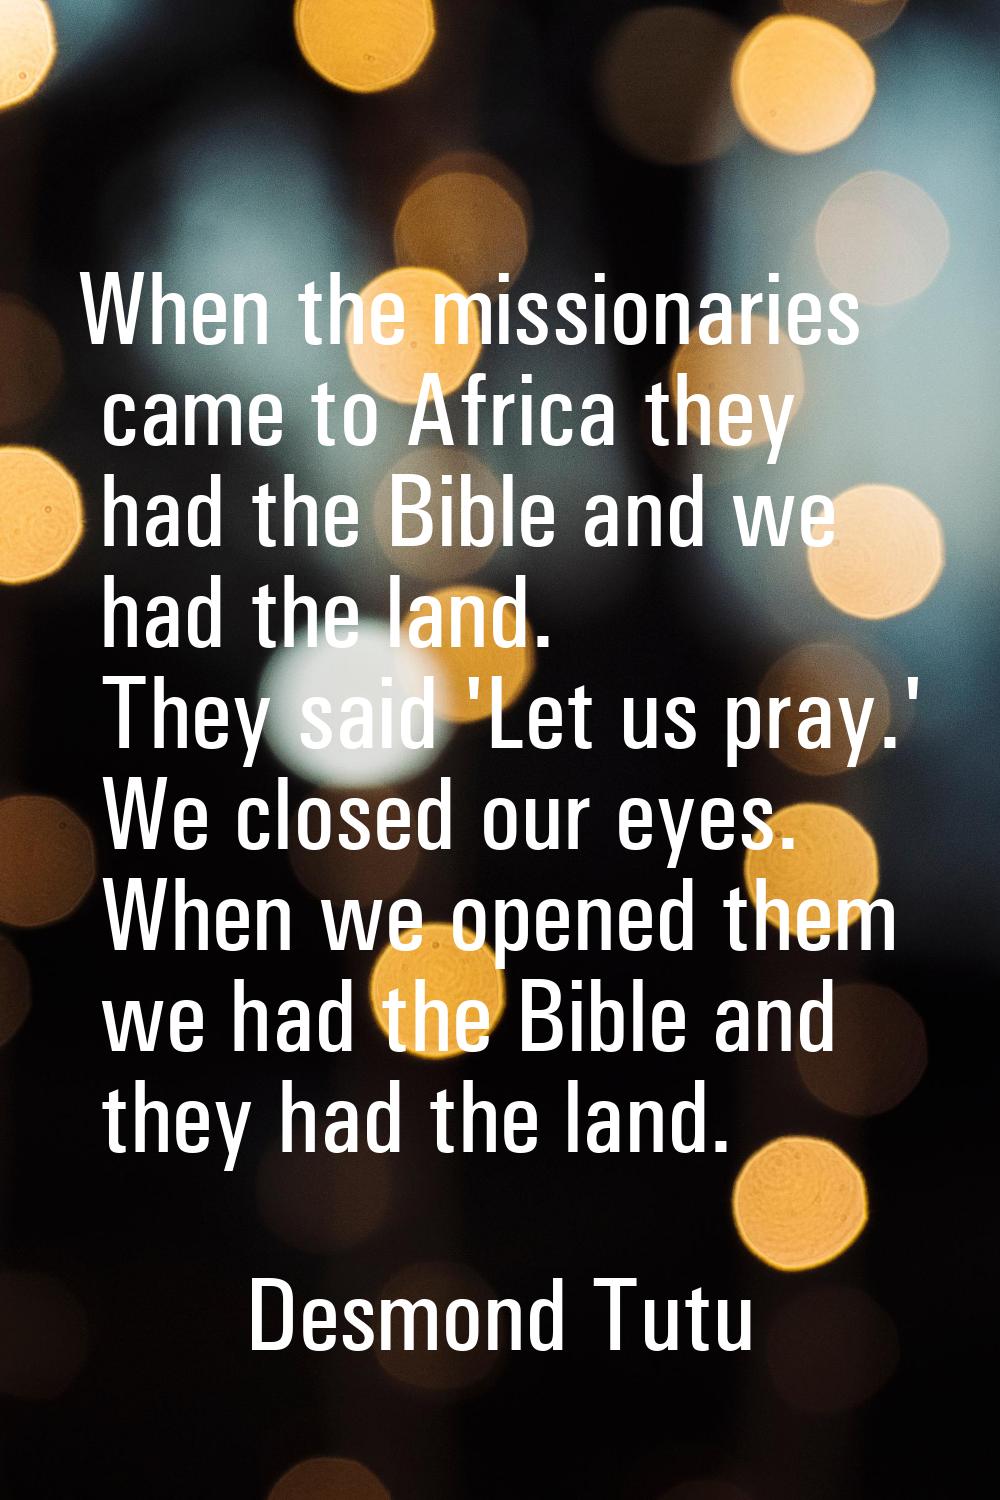 When the missionaries came to Africa they had the Bible and we had the land. They said 'Let us pray